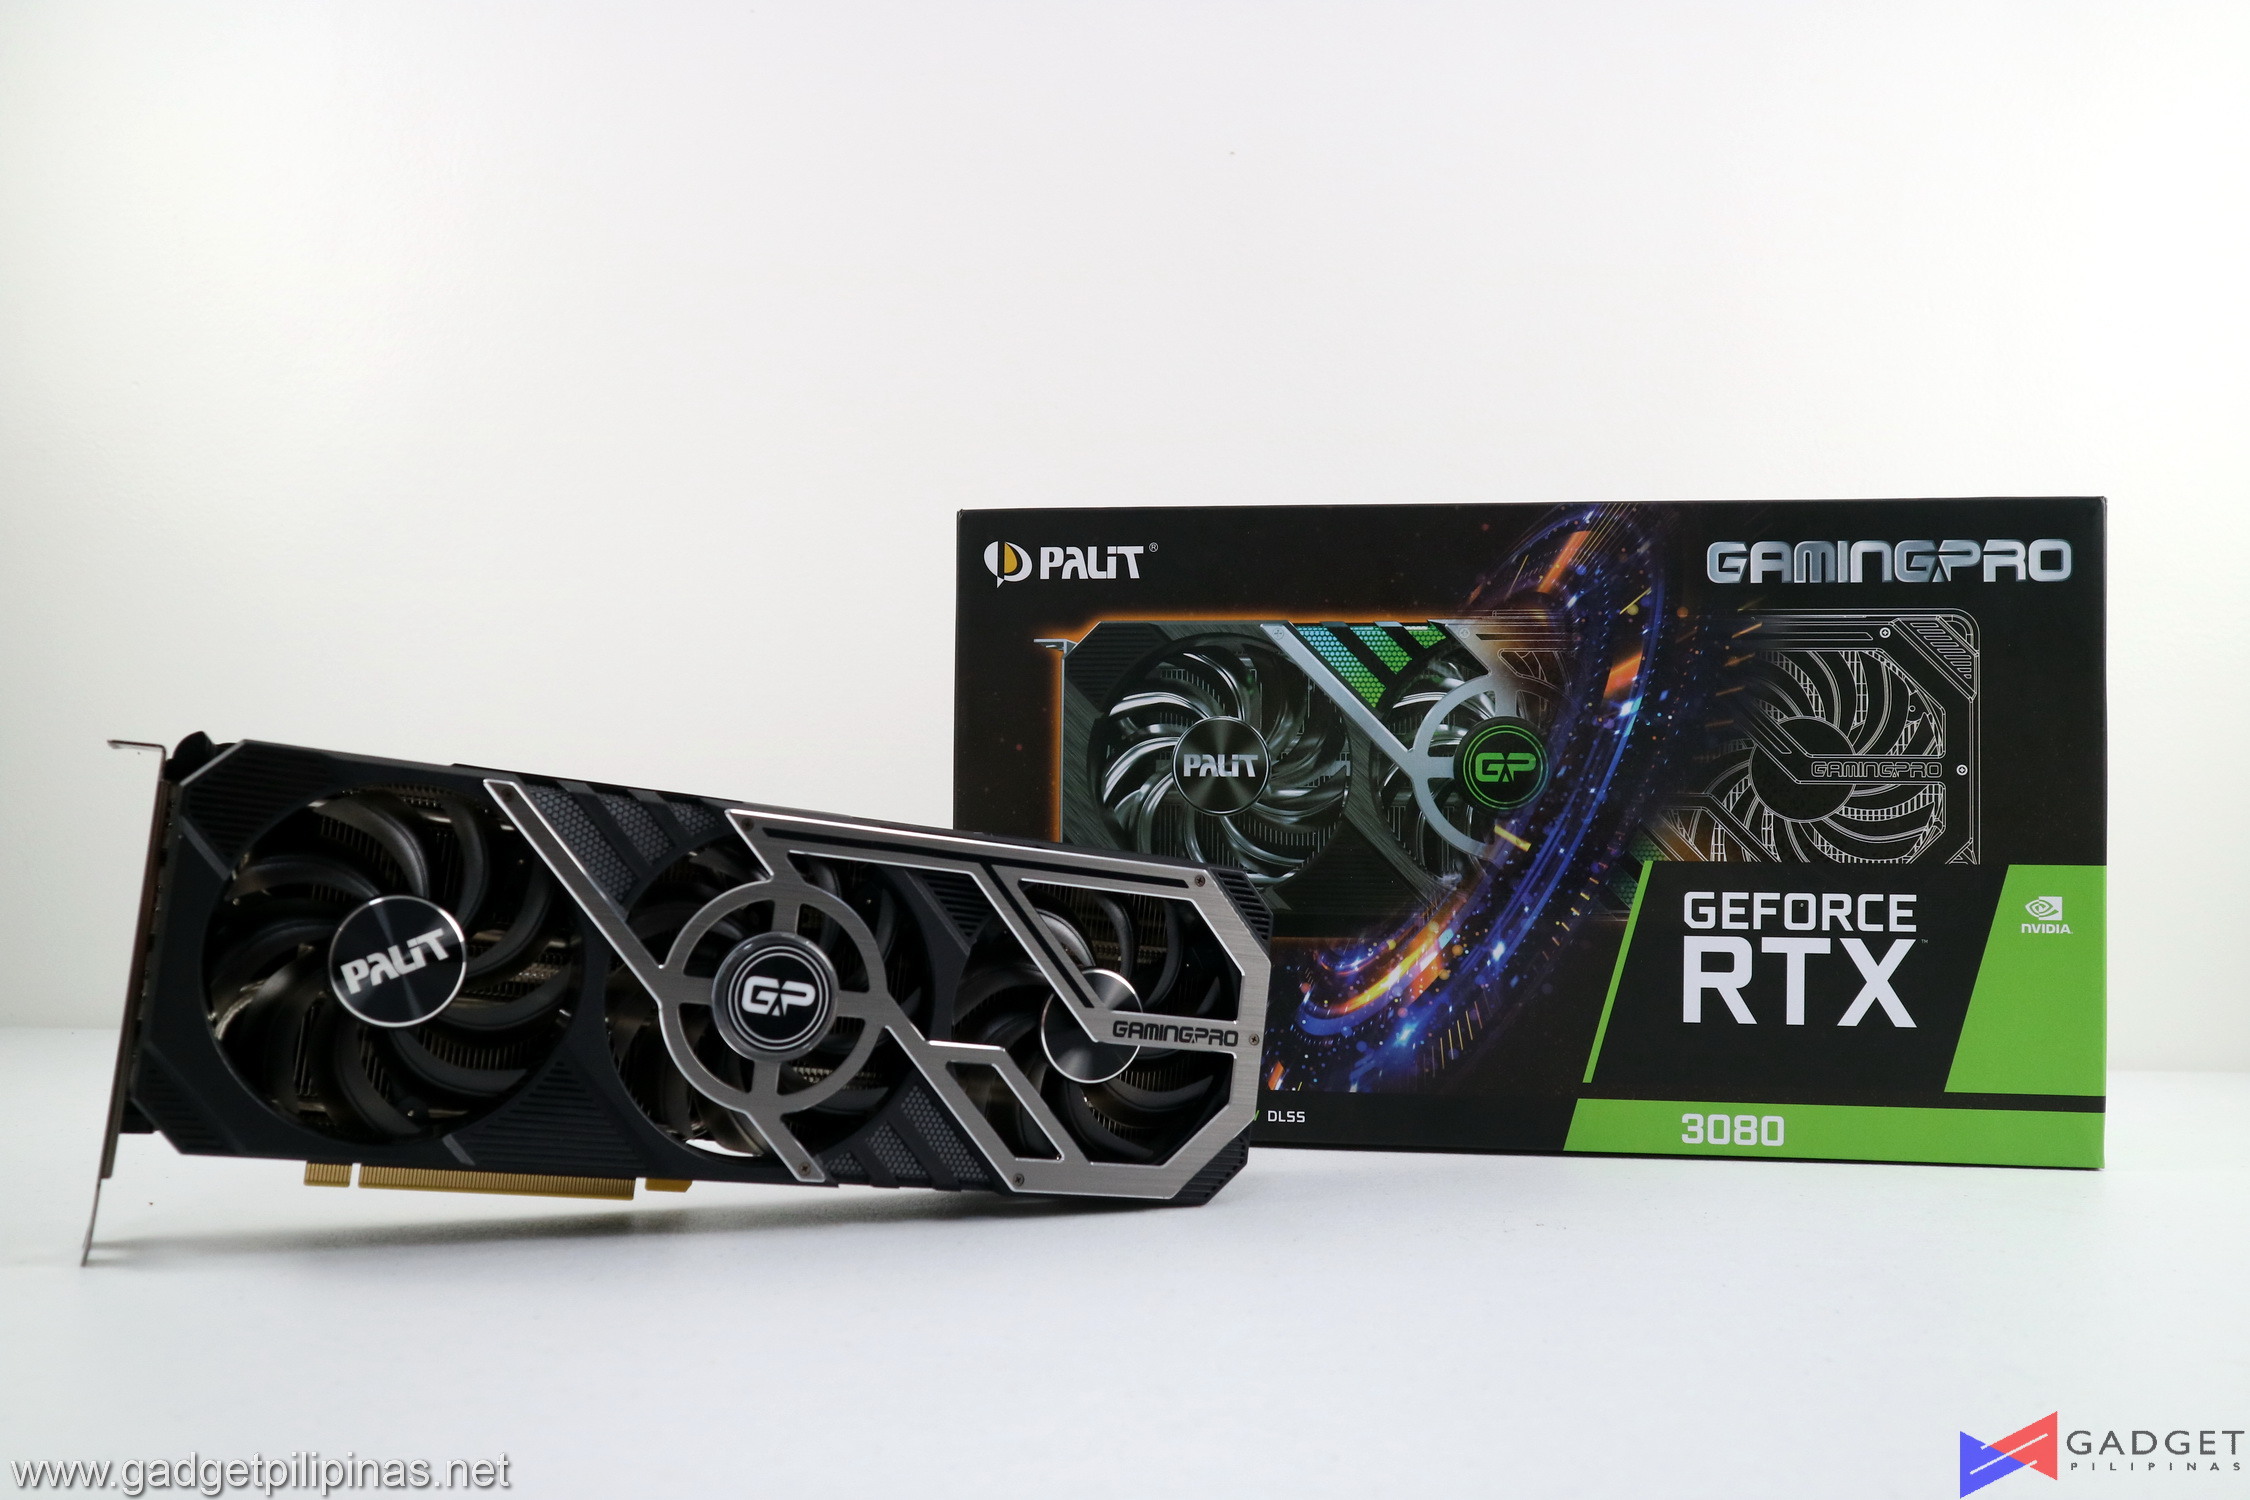 Palit GeForce RTX 3080 Gaming Pro Graphics Card Review - Gadget 